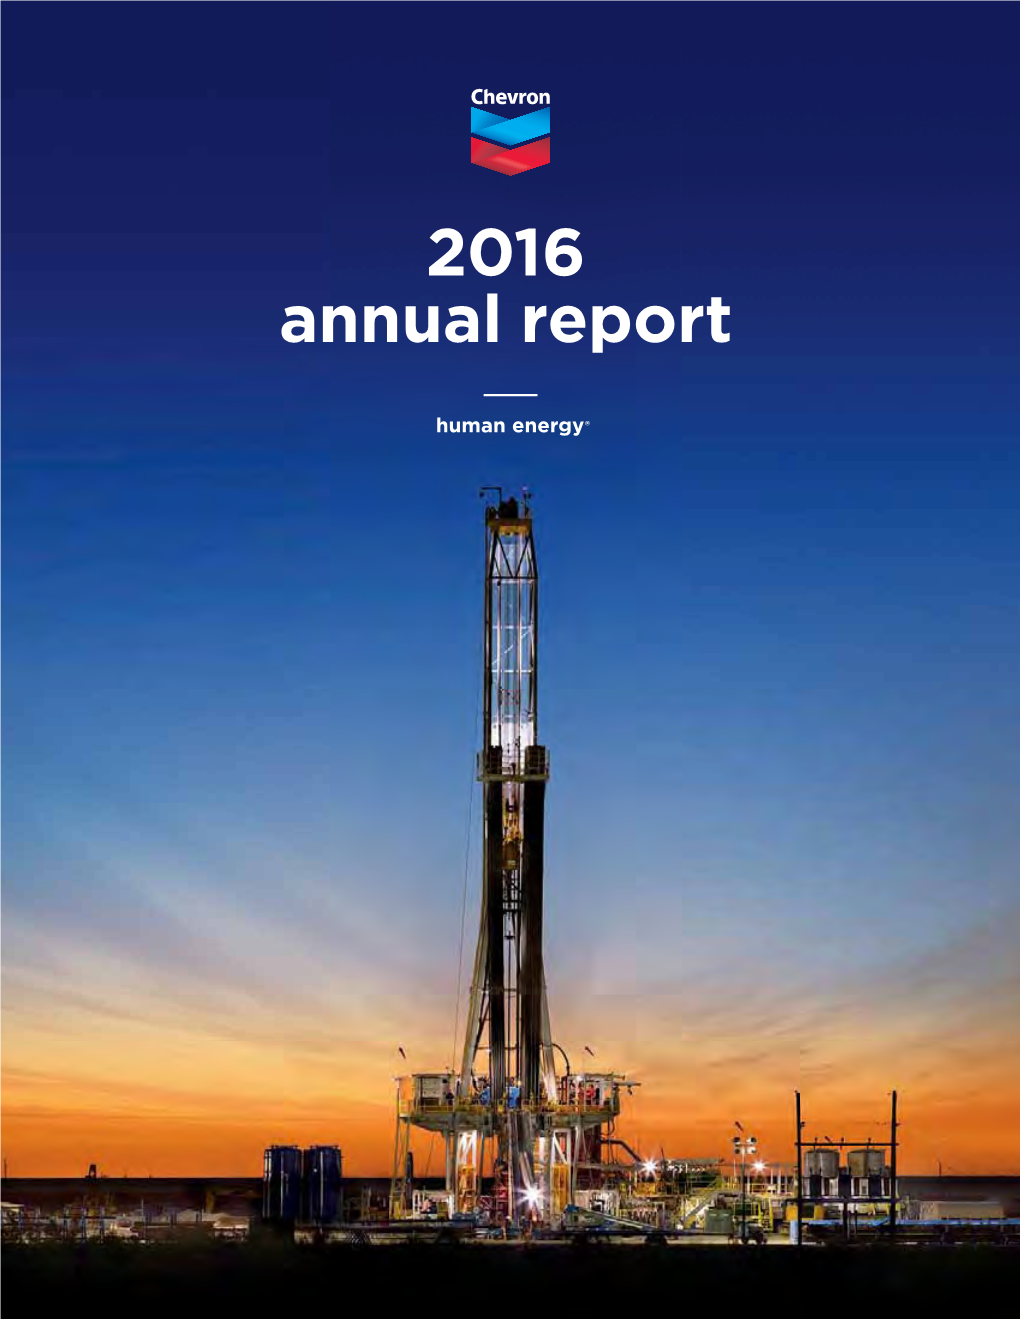 Chevron Corporation 2016 Annual Report 29Th Consecutive Year 2016 Marked the 29Th Consecutive Year We Increased the Annual Per-Share Dividend Payout